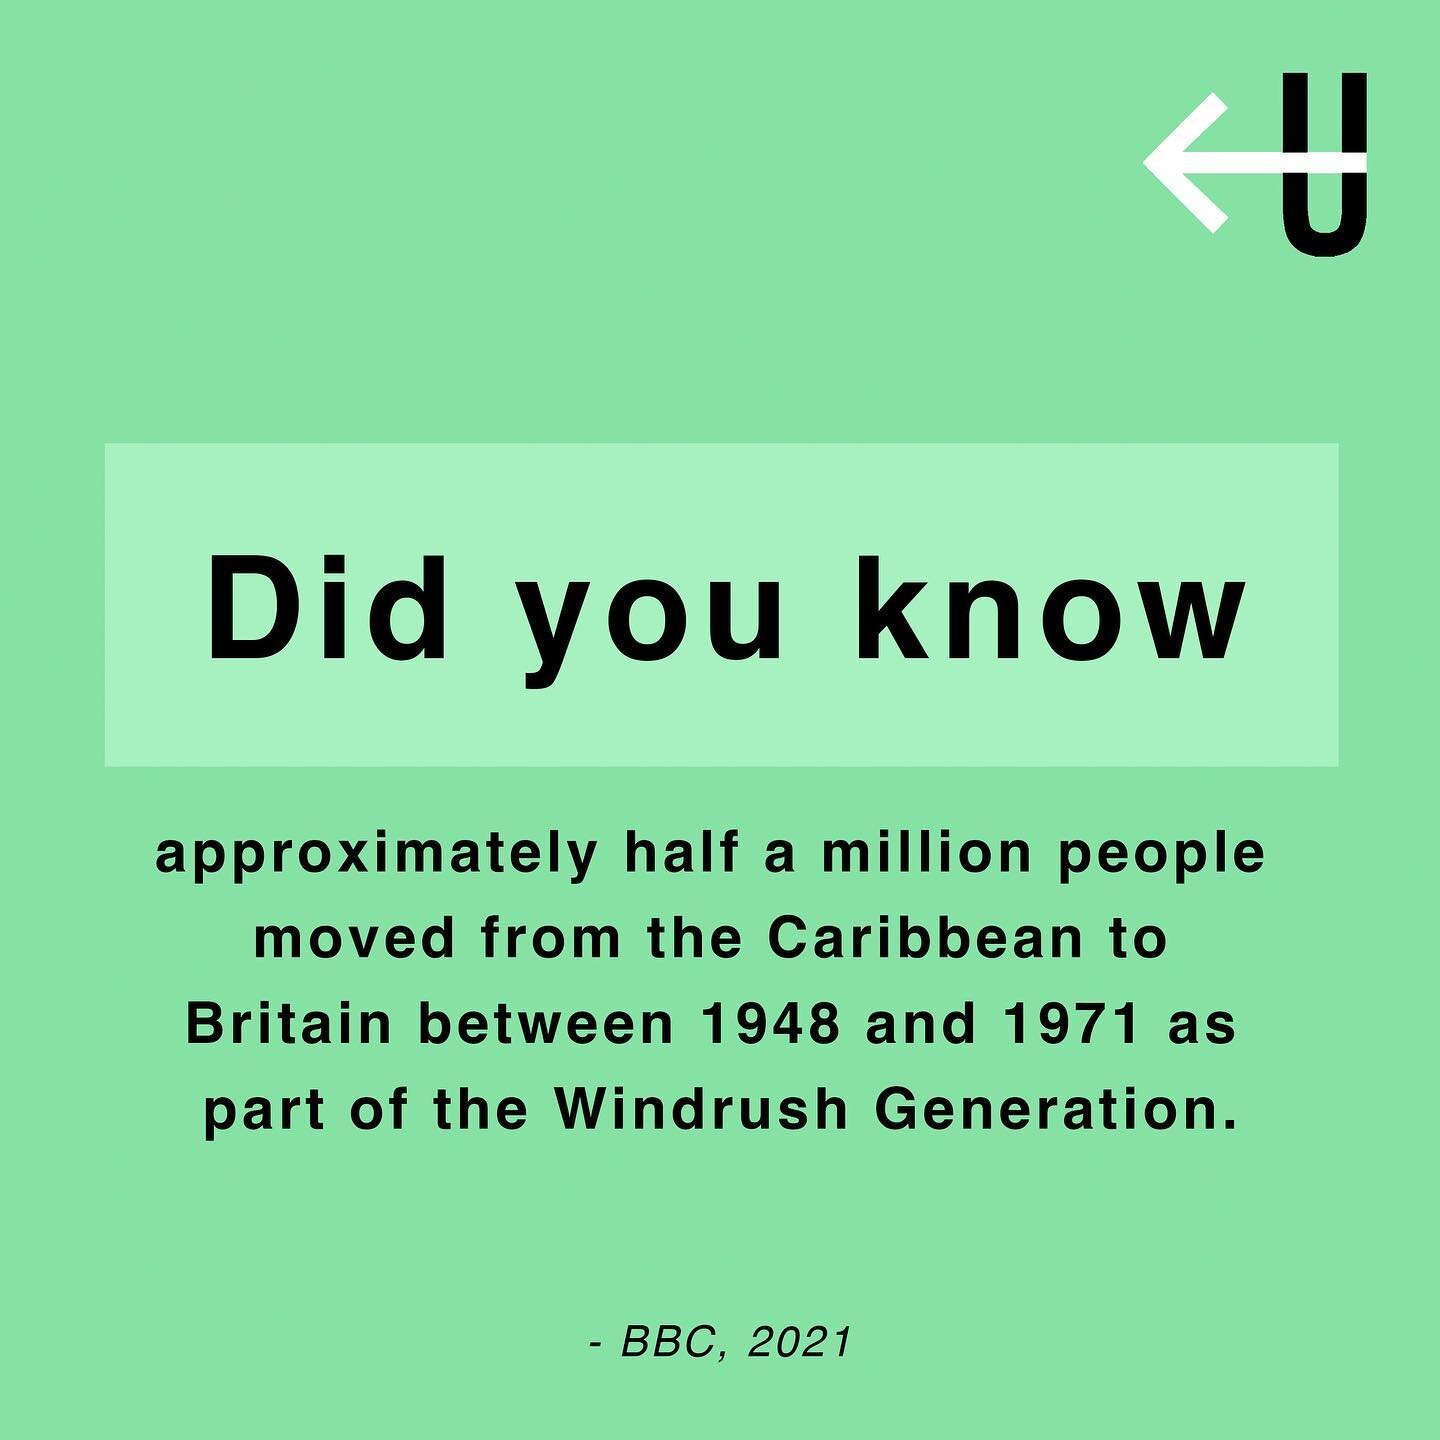 ⁣22nd June is Windrush Day in the UK, a day designed to celebrate the contributions to British society of so many British Caribbean people that comprised the Windrush generation, their descendants as well as those who followed them. This observed day